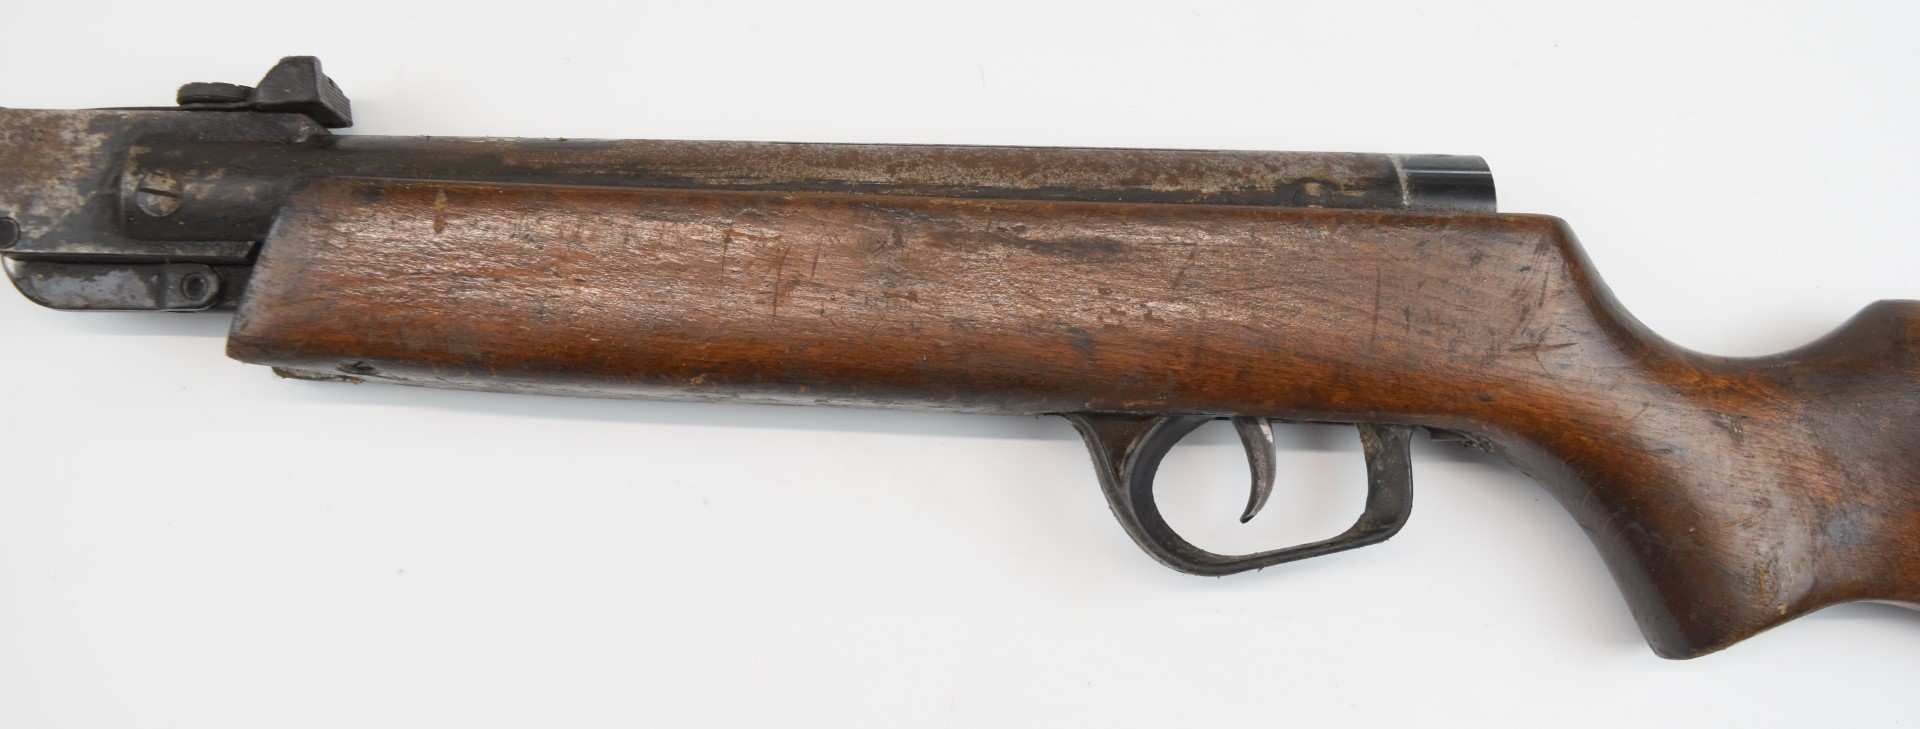 Gamo .22 air rifle with semi-pistol grip and adjustable sights, serial number T68059. - Image 12 of 16